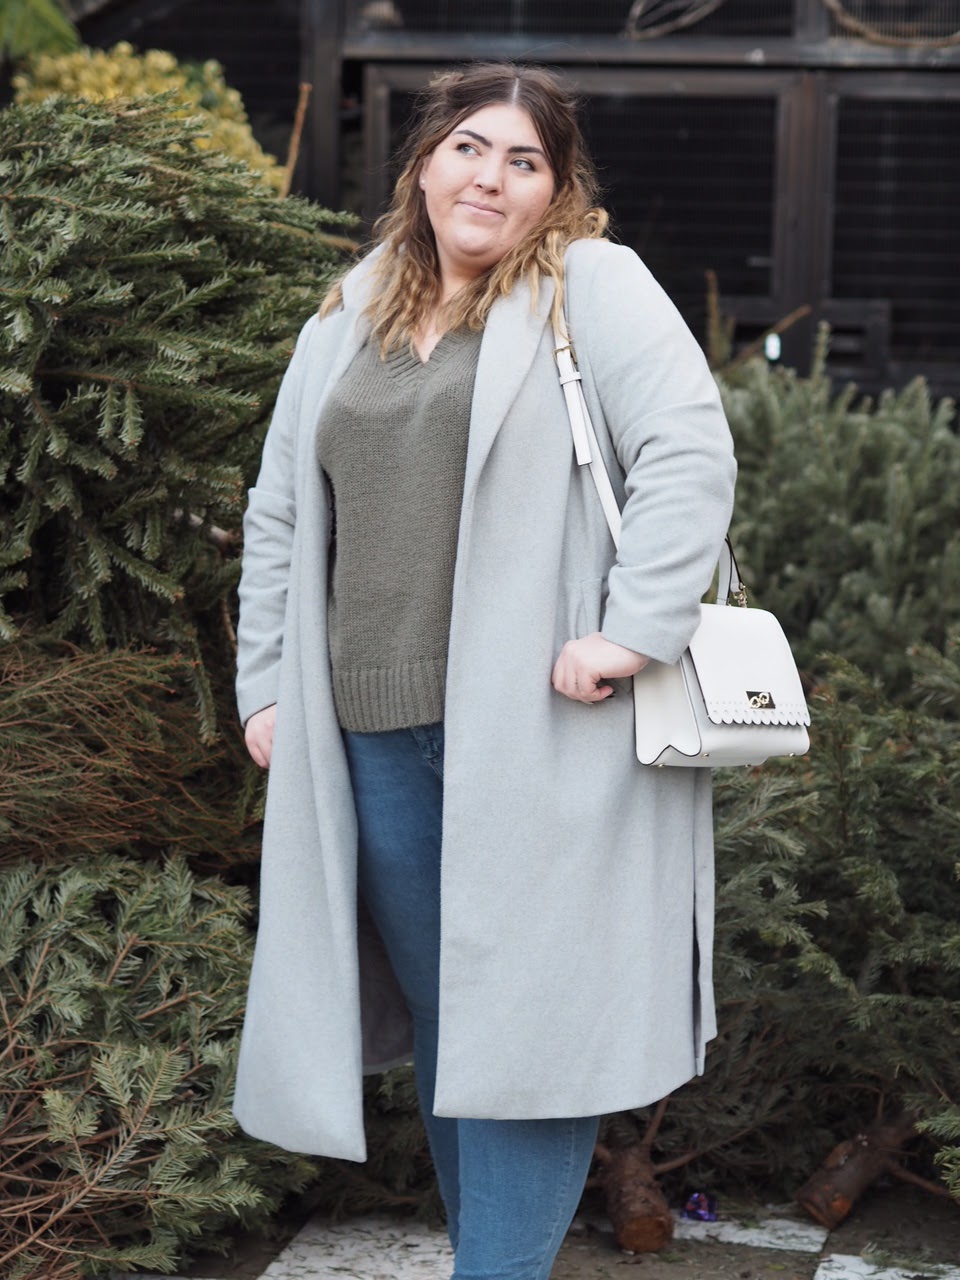 Wrap Up In New Look Curves - Cardifforniagurl